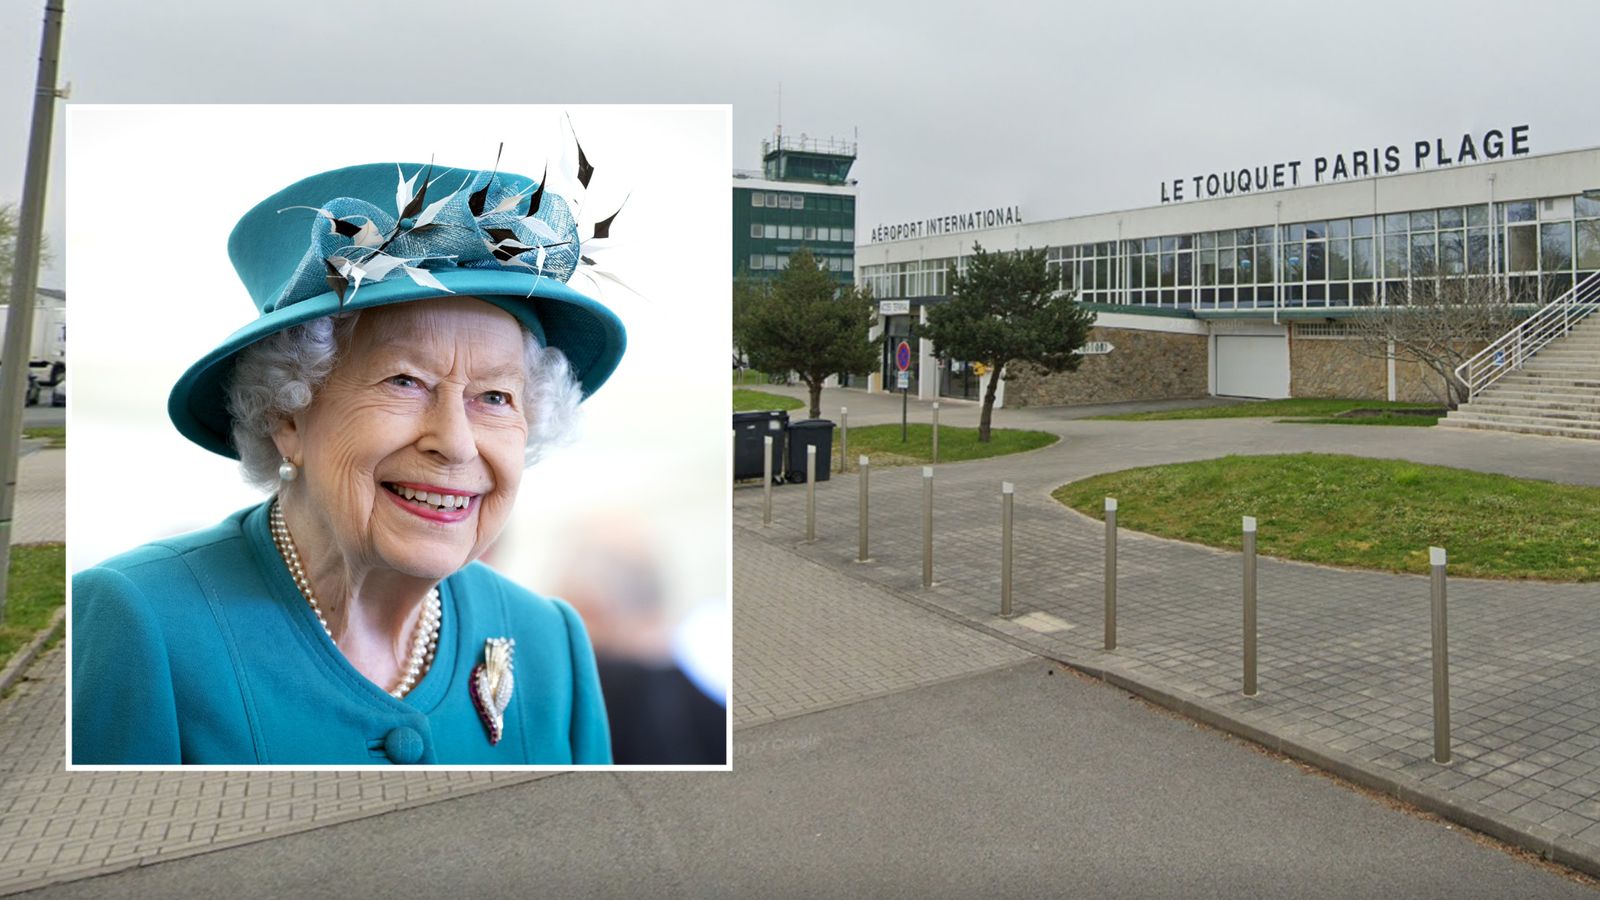 French airport to be renamed after Queen Elizabeth II